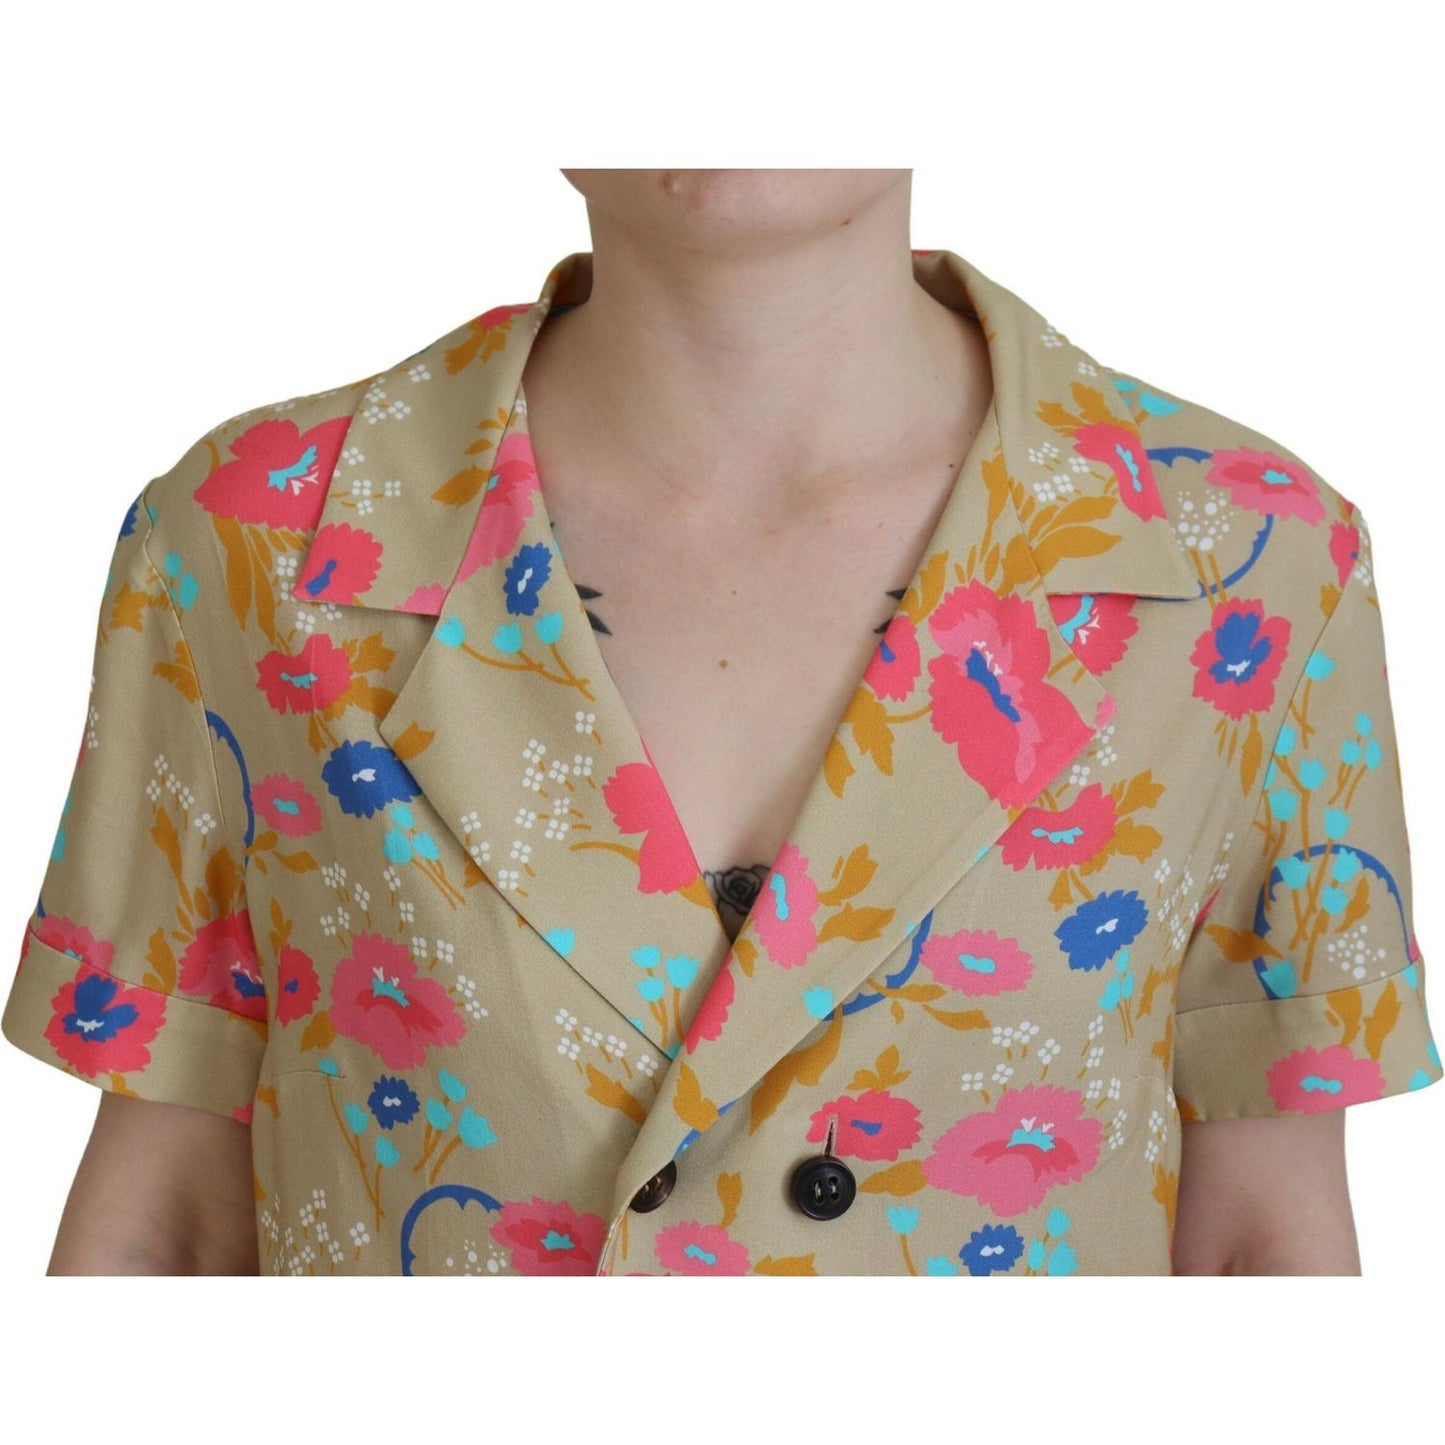 Dsquared²Multicolor Printed Collared Button Front Long Blouse TopMcRichard Designer Brands£549.00